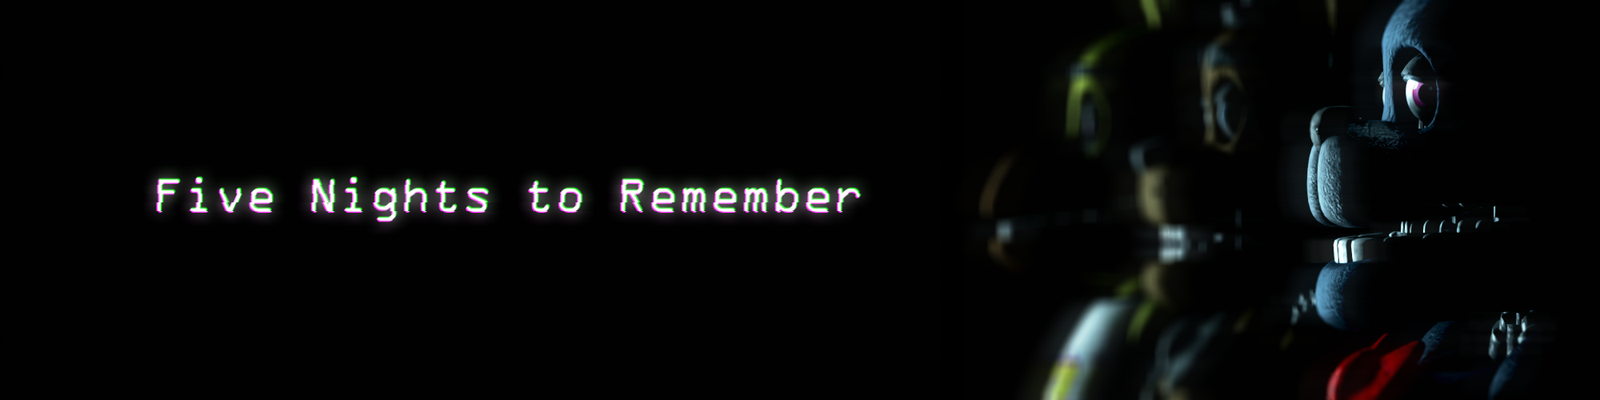 Five Nights to Remeber Remake (Prevous Versions